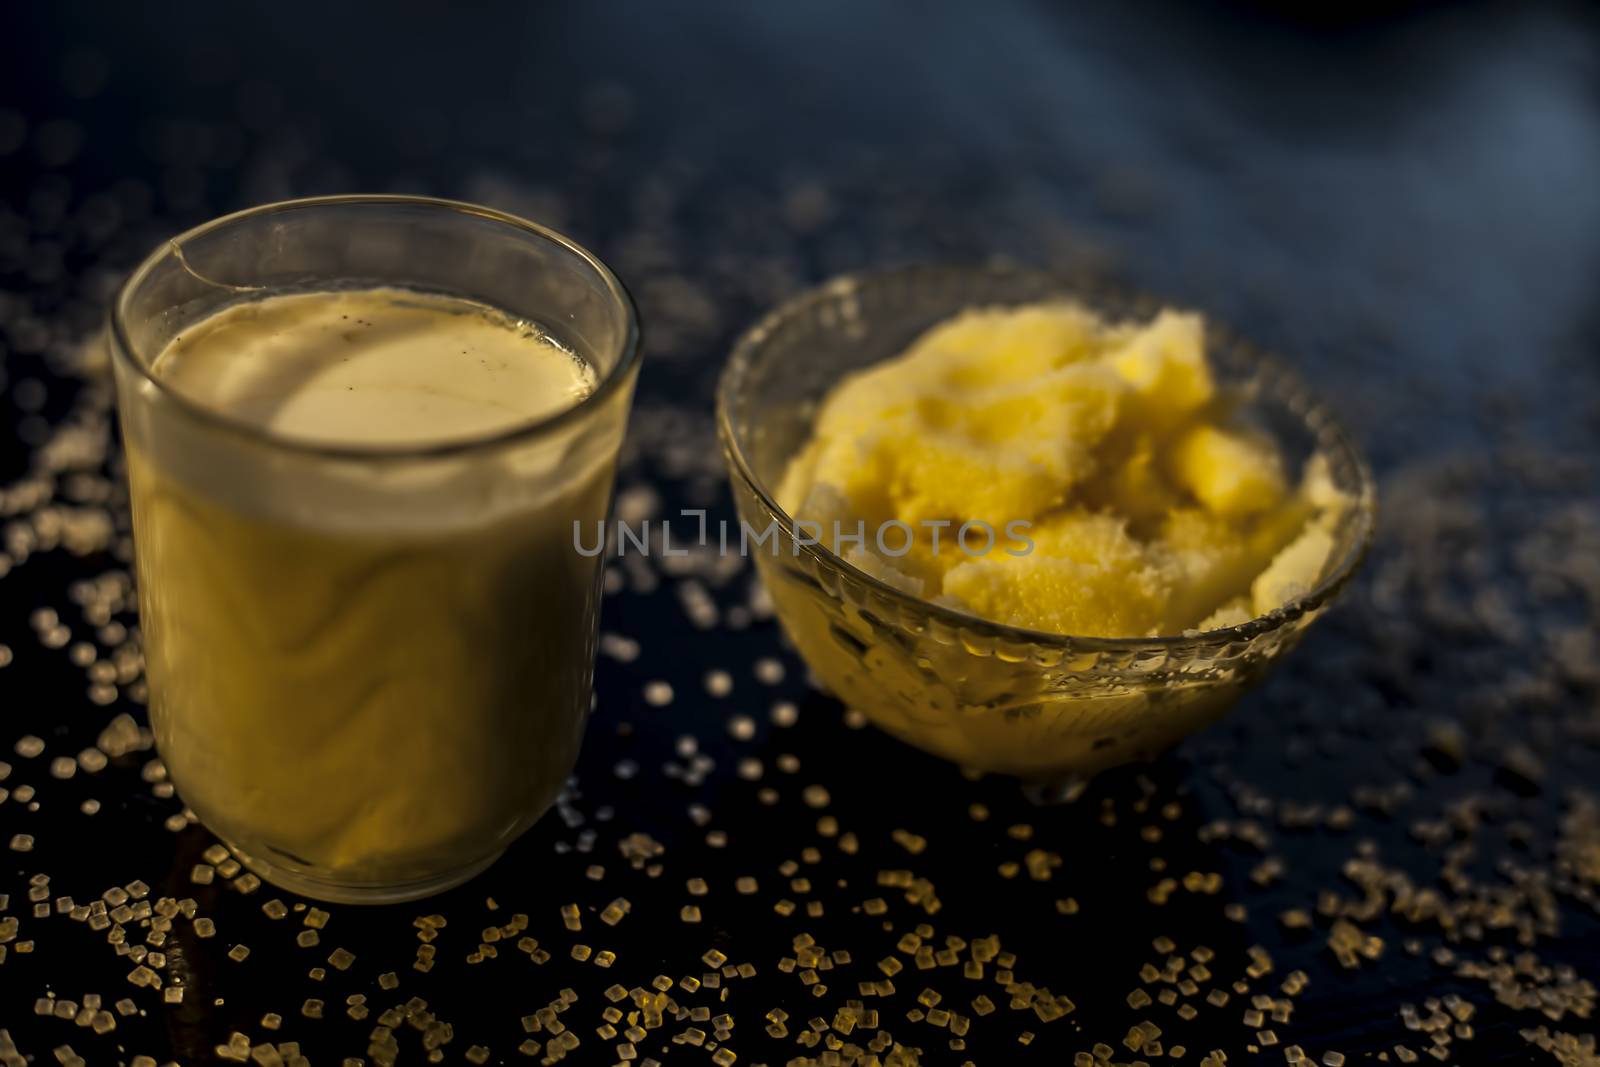 Close up of glass bowl of pure milk well mixed with hot milk in it on black wooden glossy surface along with raw ghee clarified butter and some sugar crystals spread on the surface. Horizontal shot.; by mirzamlk